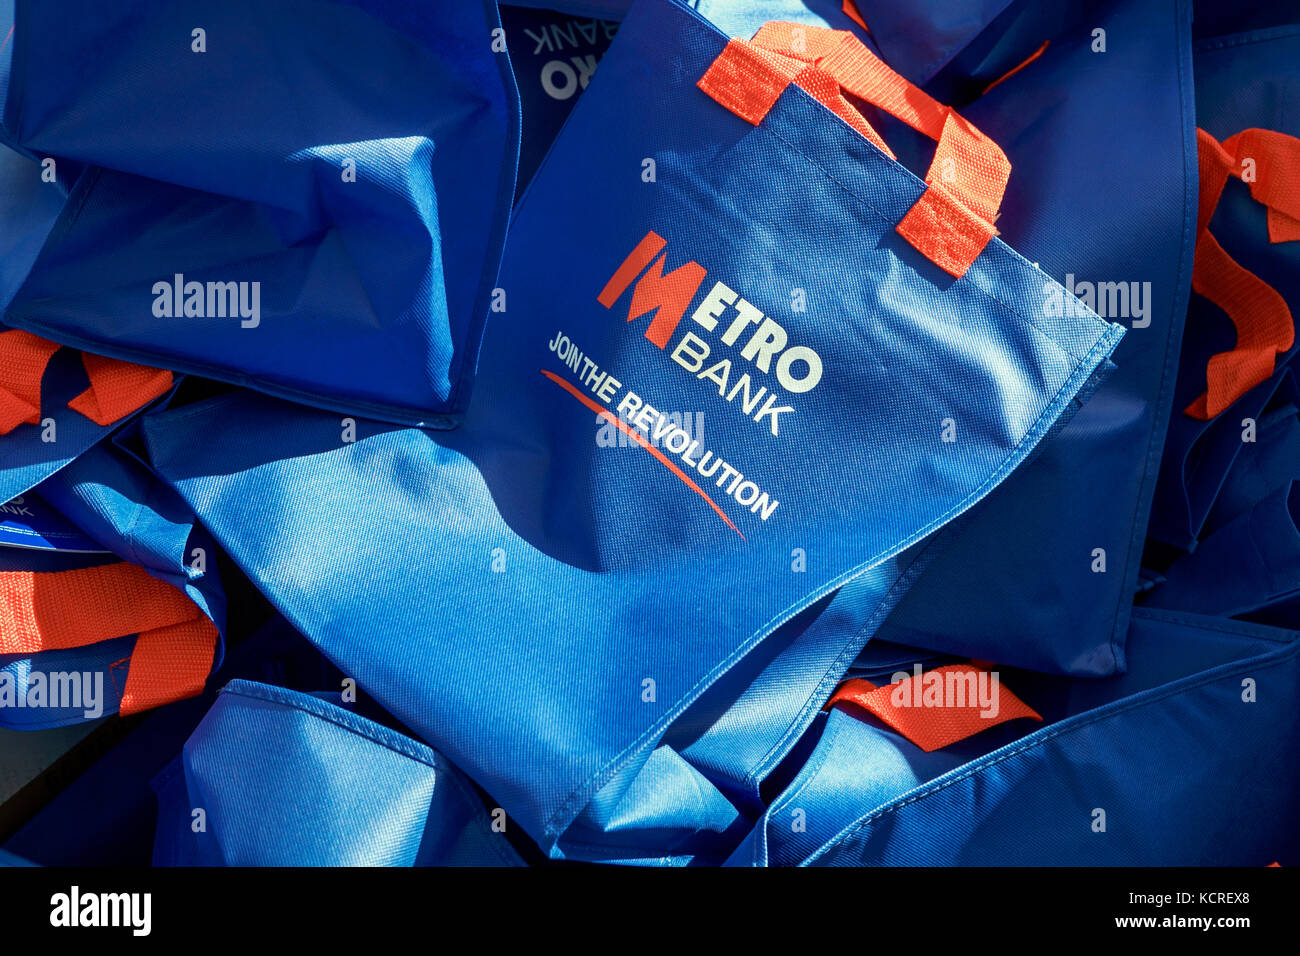 Metro Bank, Join The Revolution, blue bags. Stock Photo